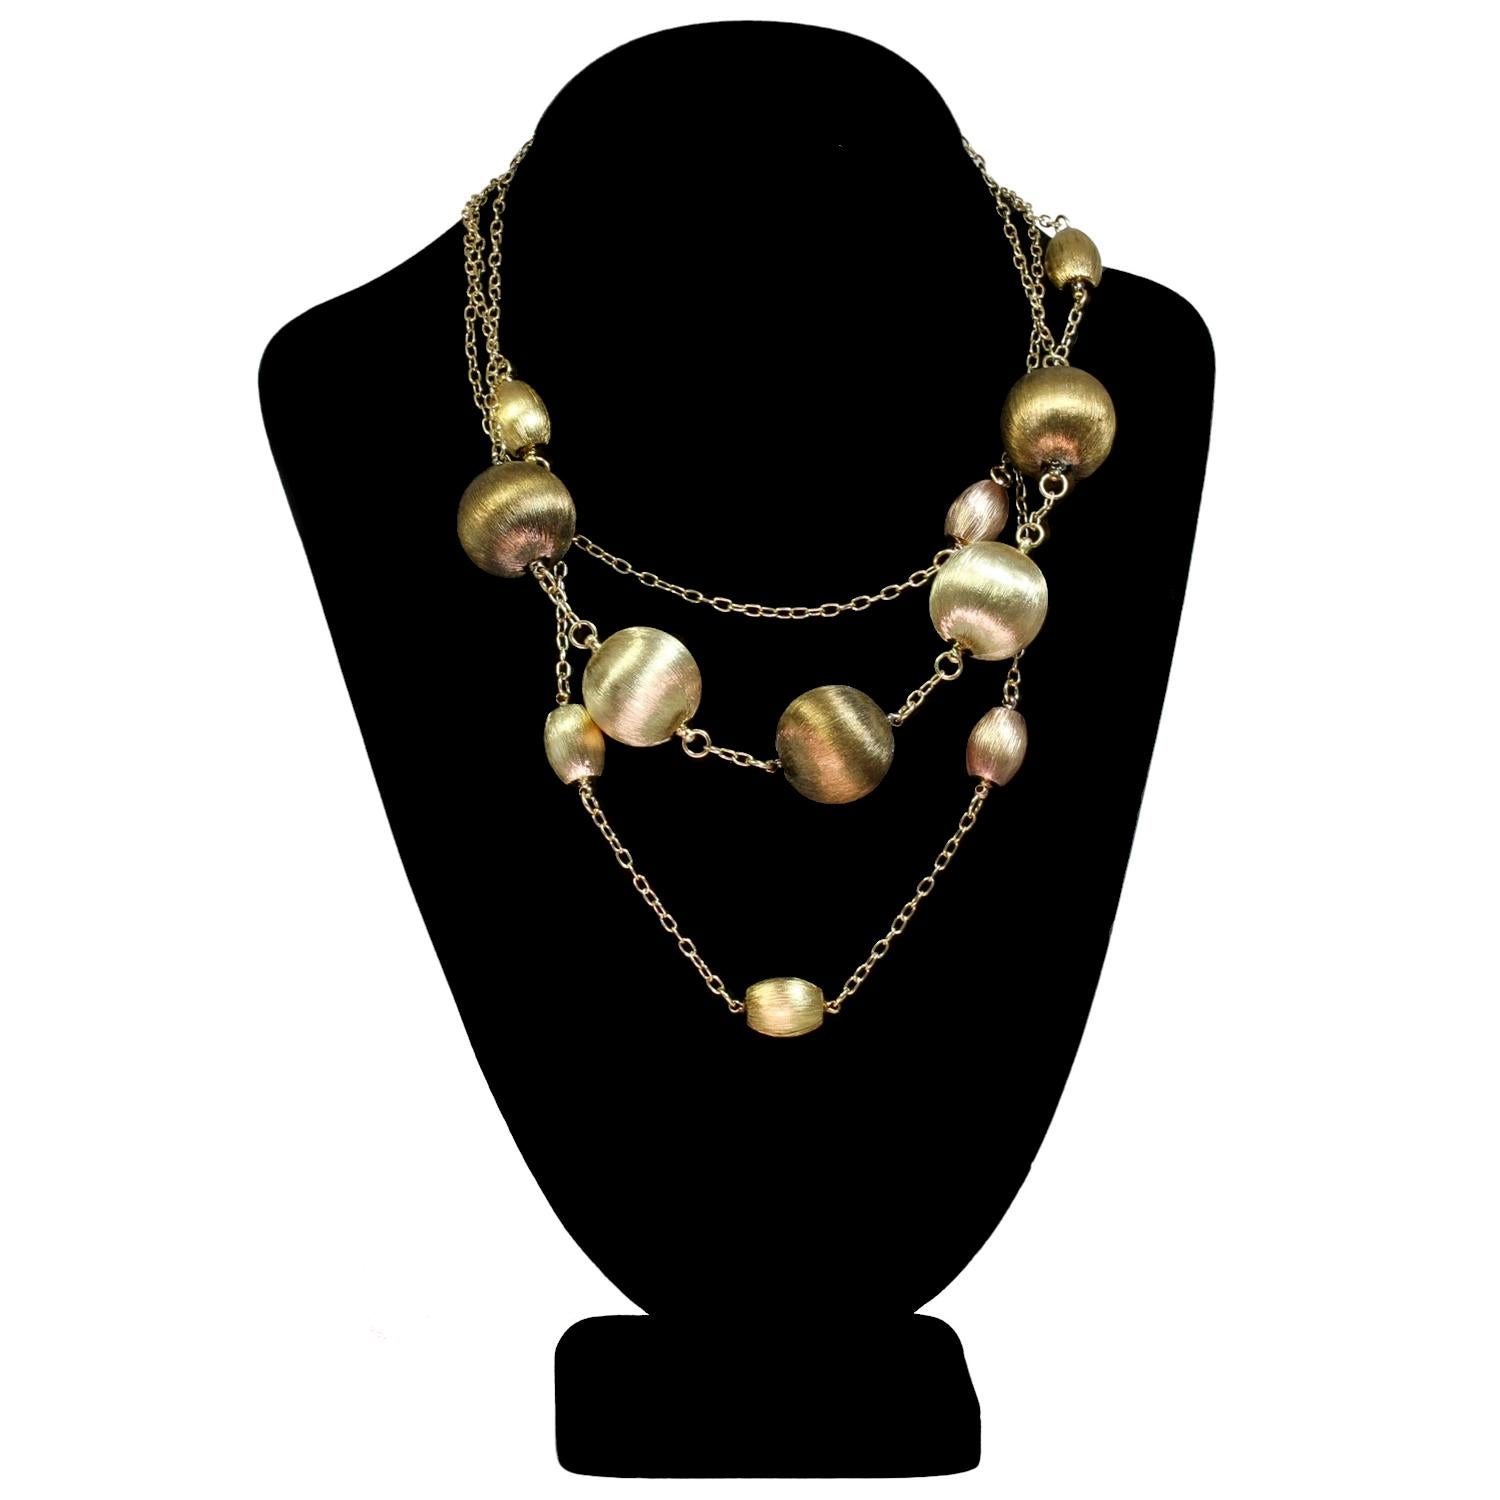 Italian Hand-Crafted Multicolor Brushed Gold Balls Choker & Long Chain Necklace In Excellent Condition For Sale In New York, NY